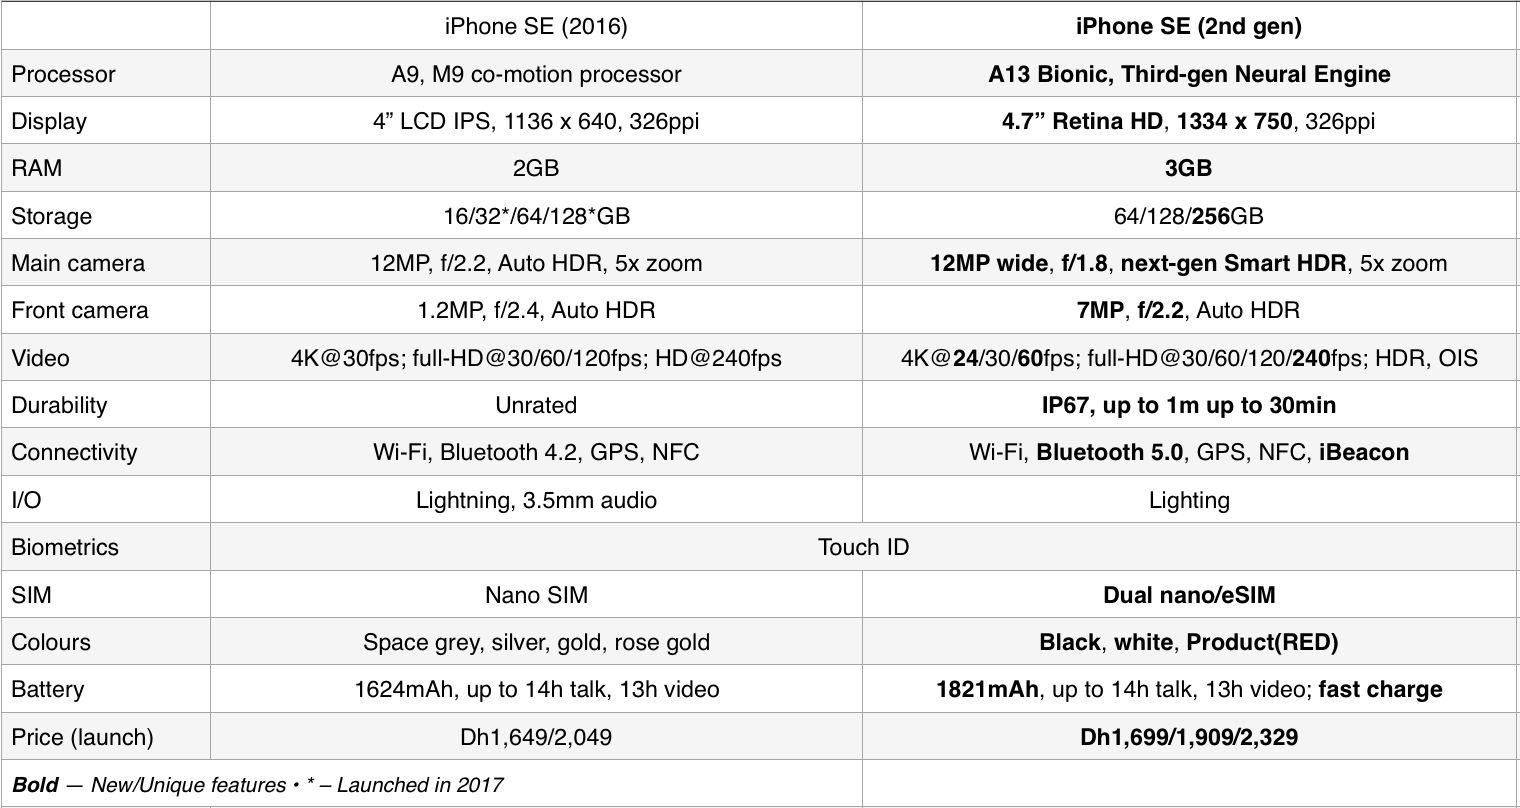 REVIEW: Apple iPhone SE (second generation) (KT23907419.PNG)